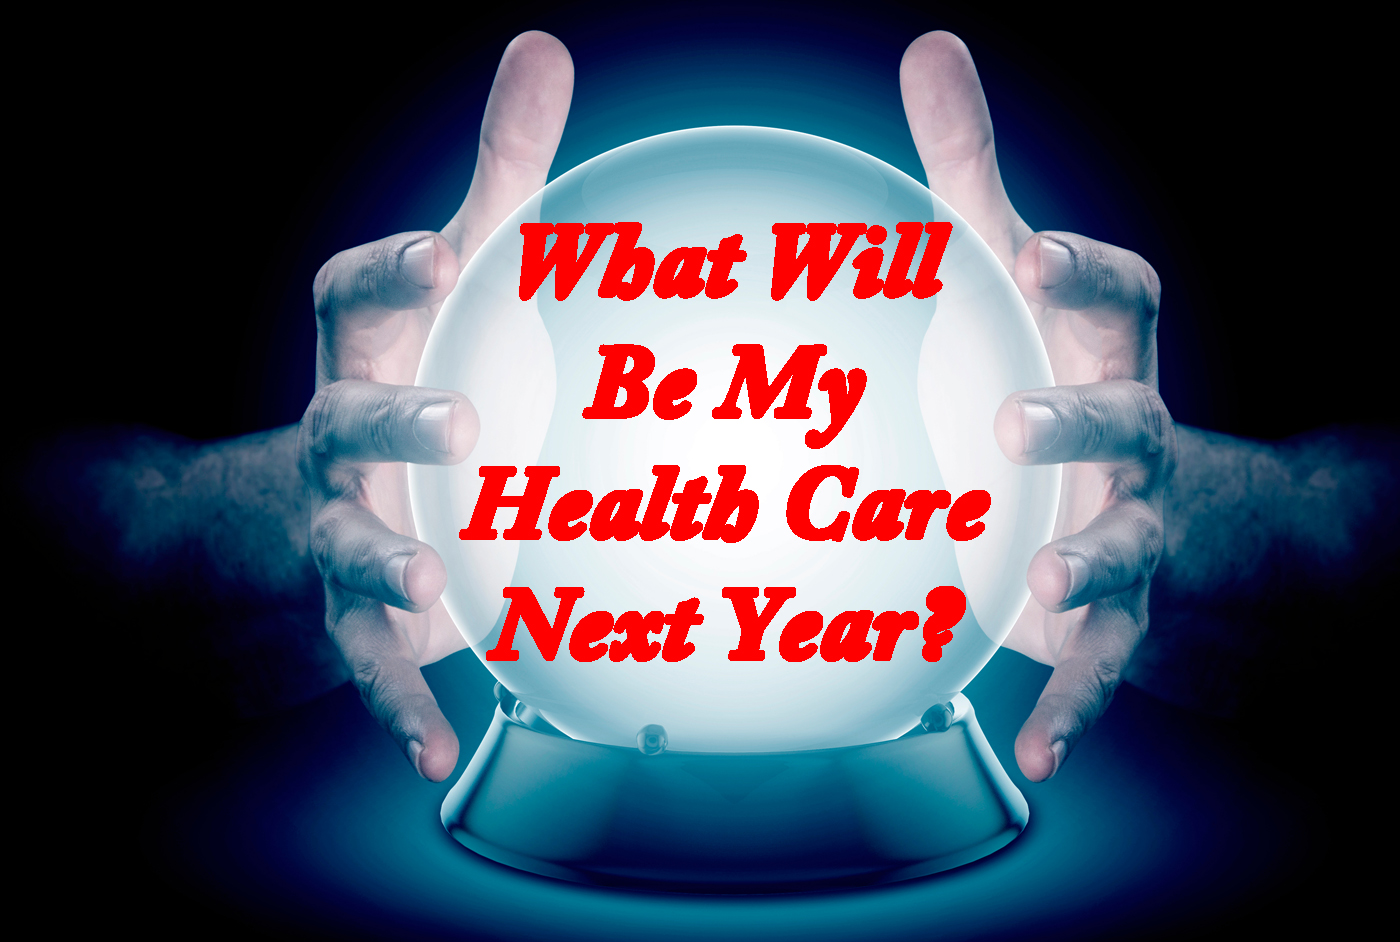 We don't have a crystal ball to predict the next year's health care use.